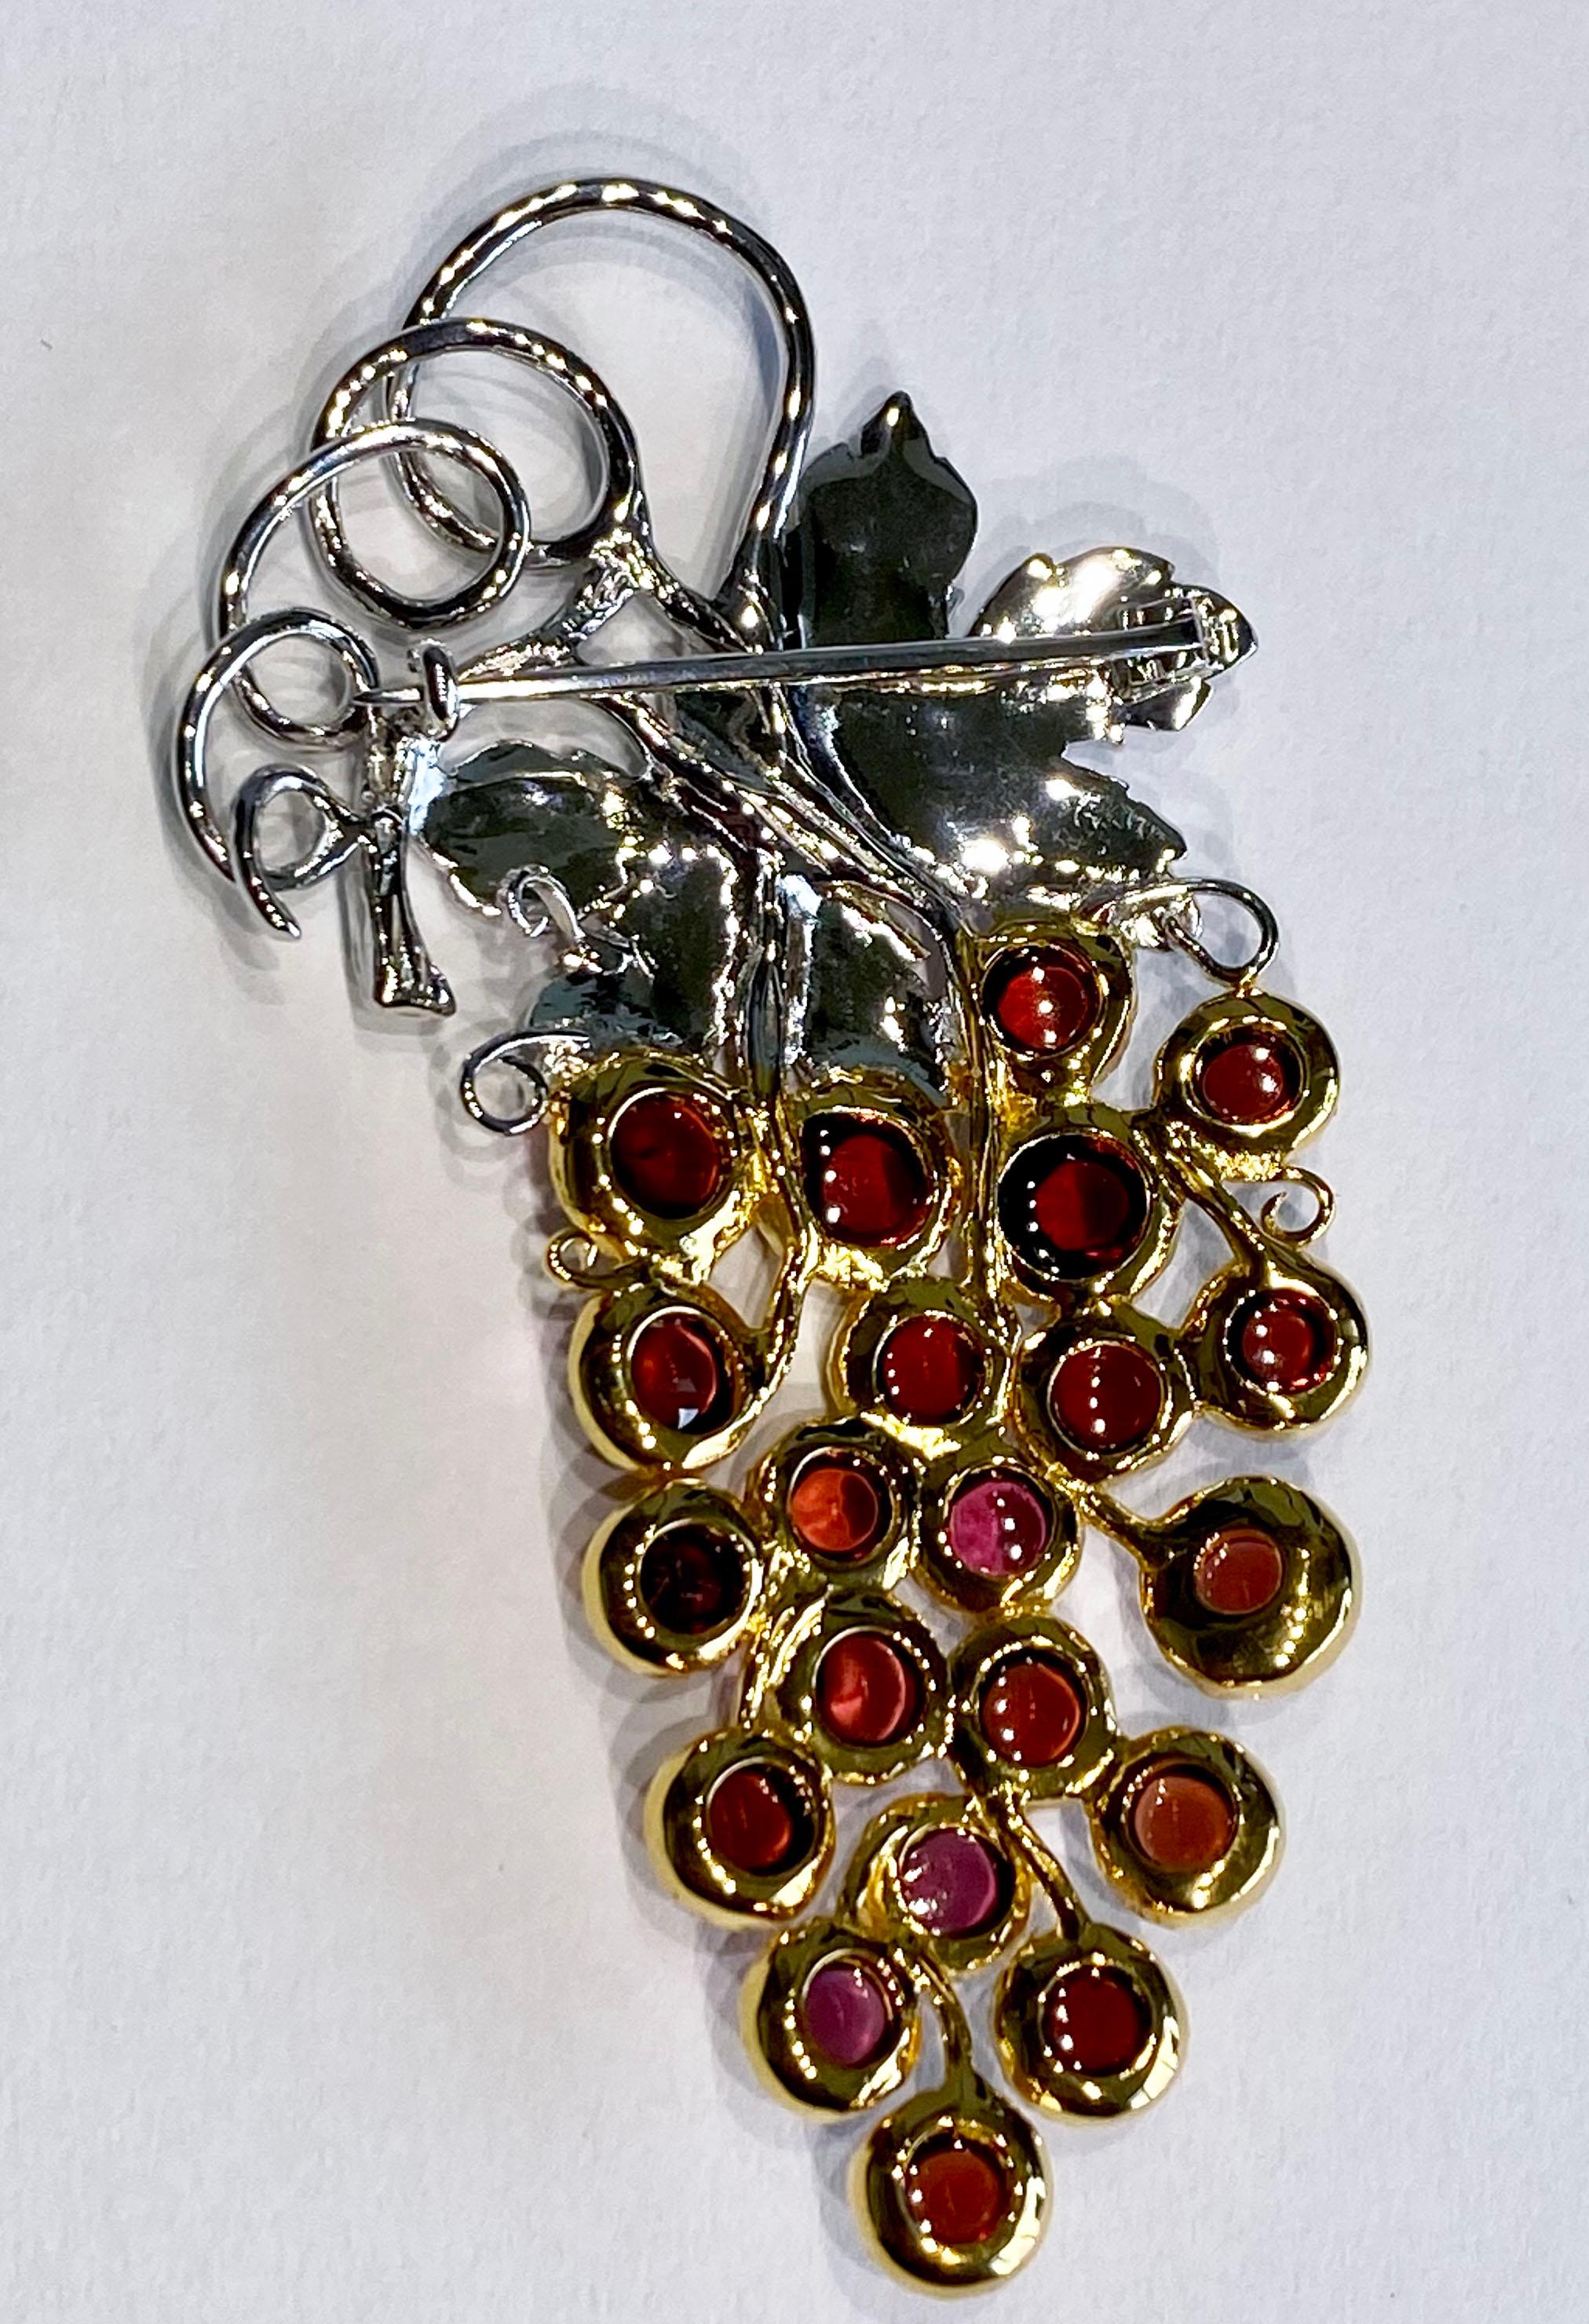 This is a one-of-a-kind masterpiece by Kary Adam. A Garnet Grape Cluster Pin/Brooch set with 21 Pyrope Garnet Cabochons mounted in Gold Plated Silver.

Originally from San Diego, California, Kary Adam lived in the “Gem Capital of the World” -